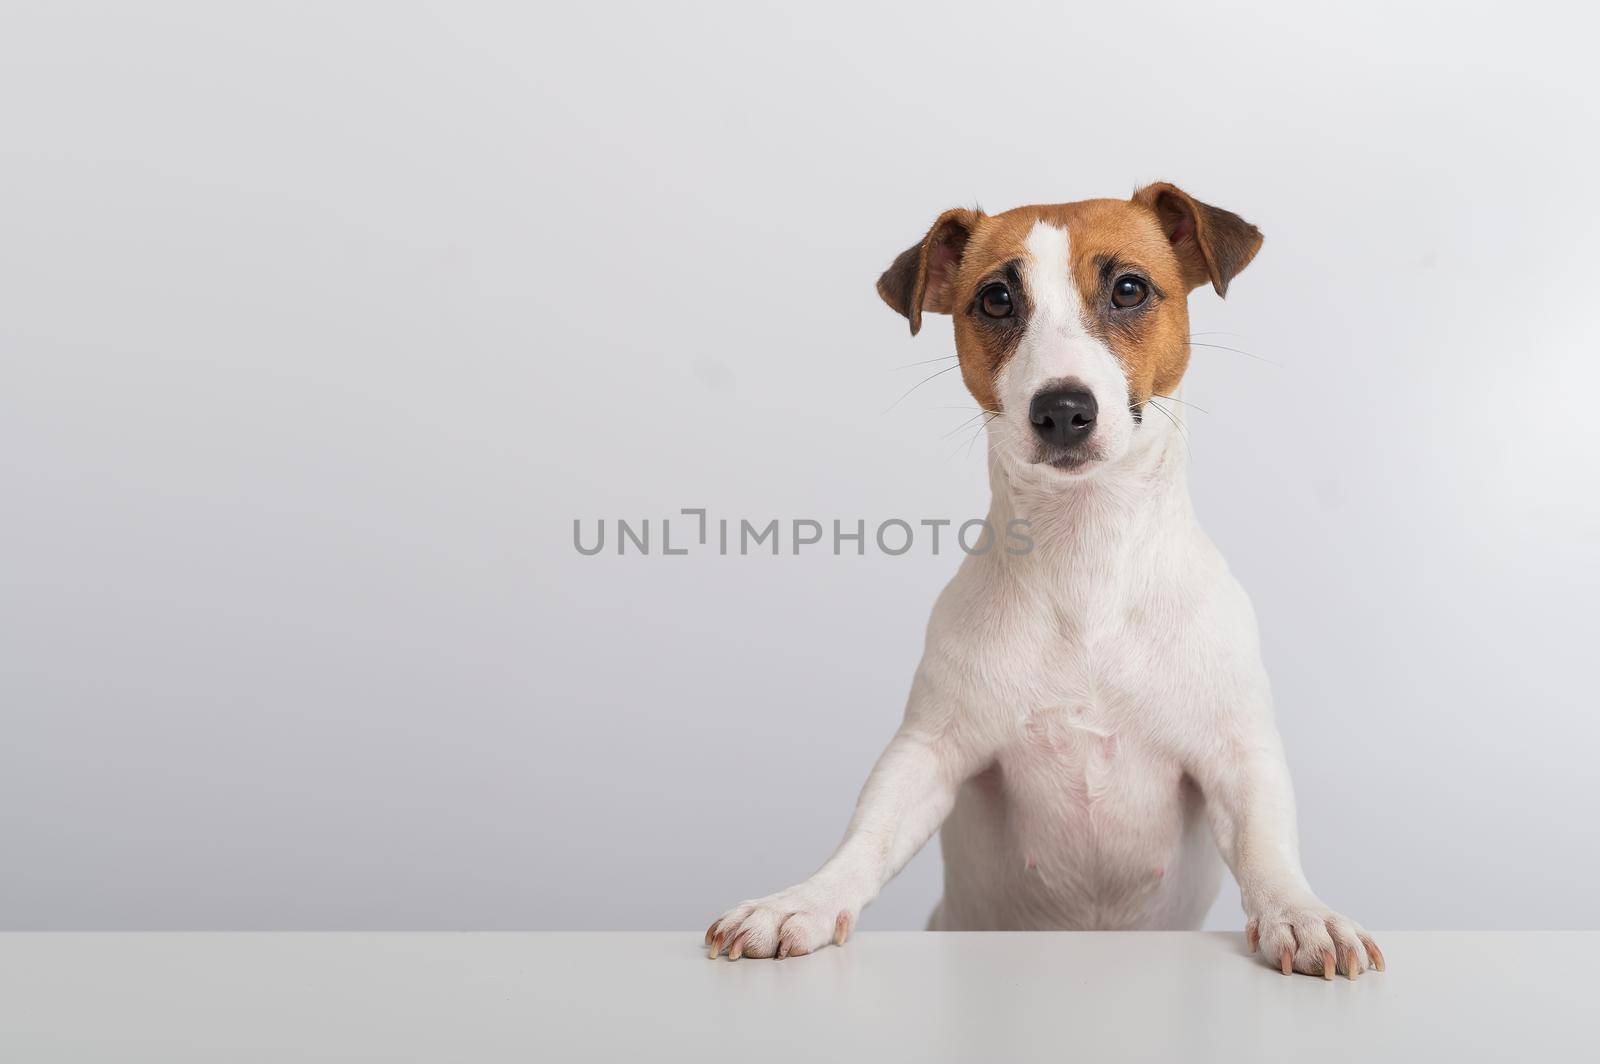 Gorgeous purebred Jack Russell Terrier dog peeking out from behind a banner on a white background. Copy space.